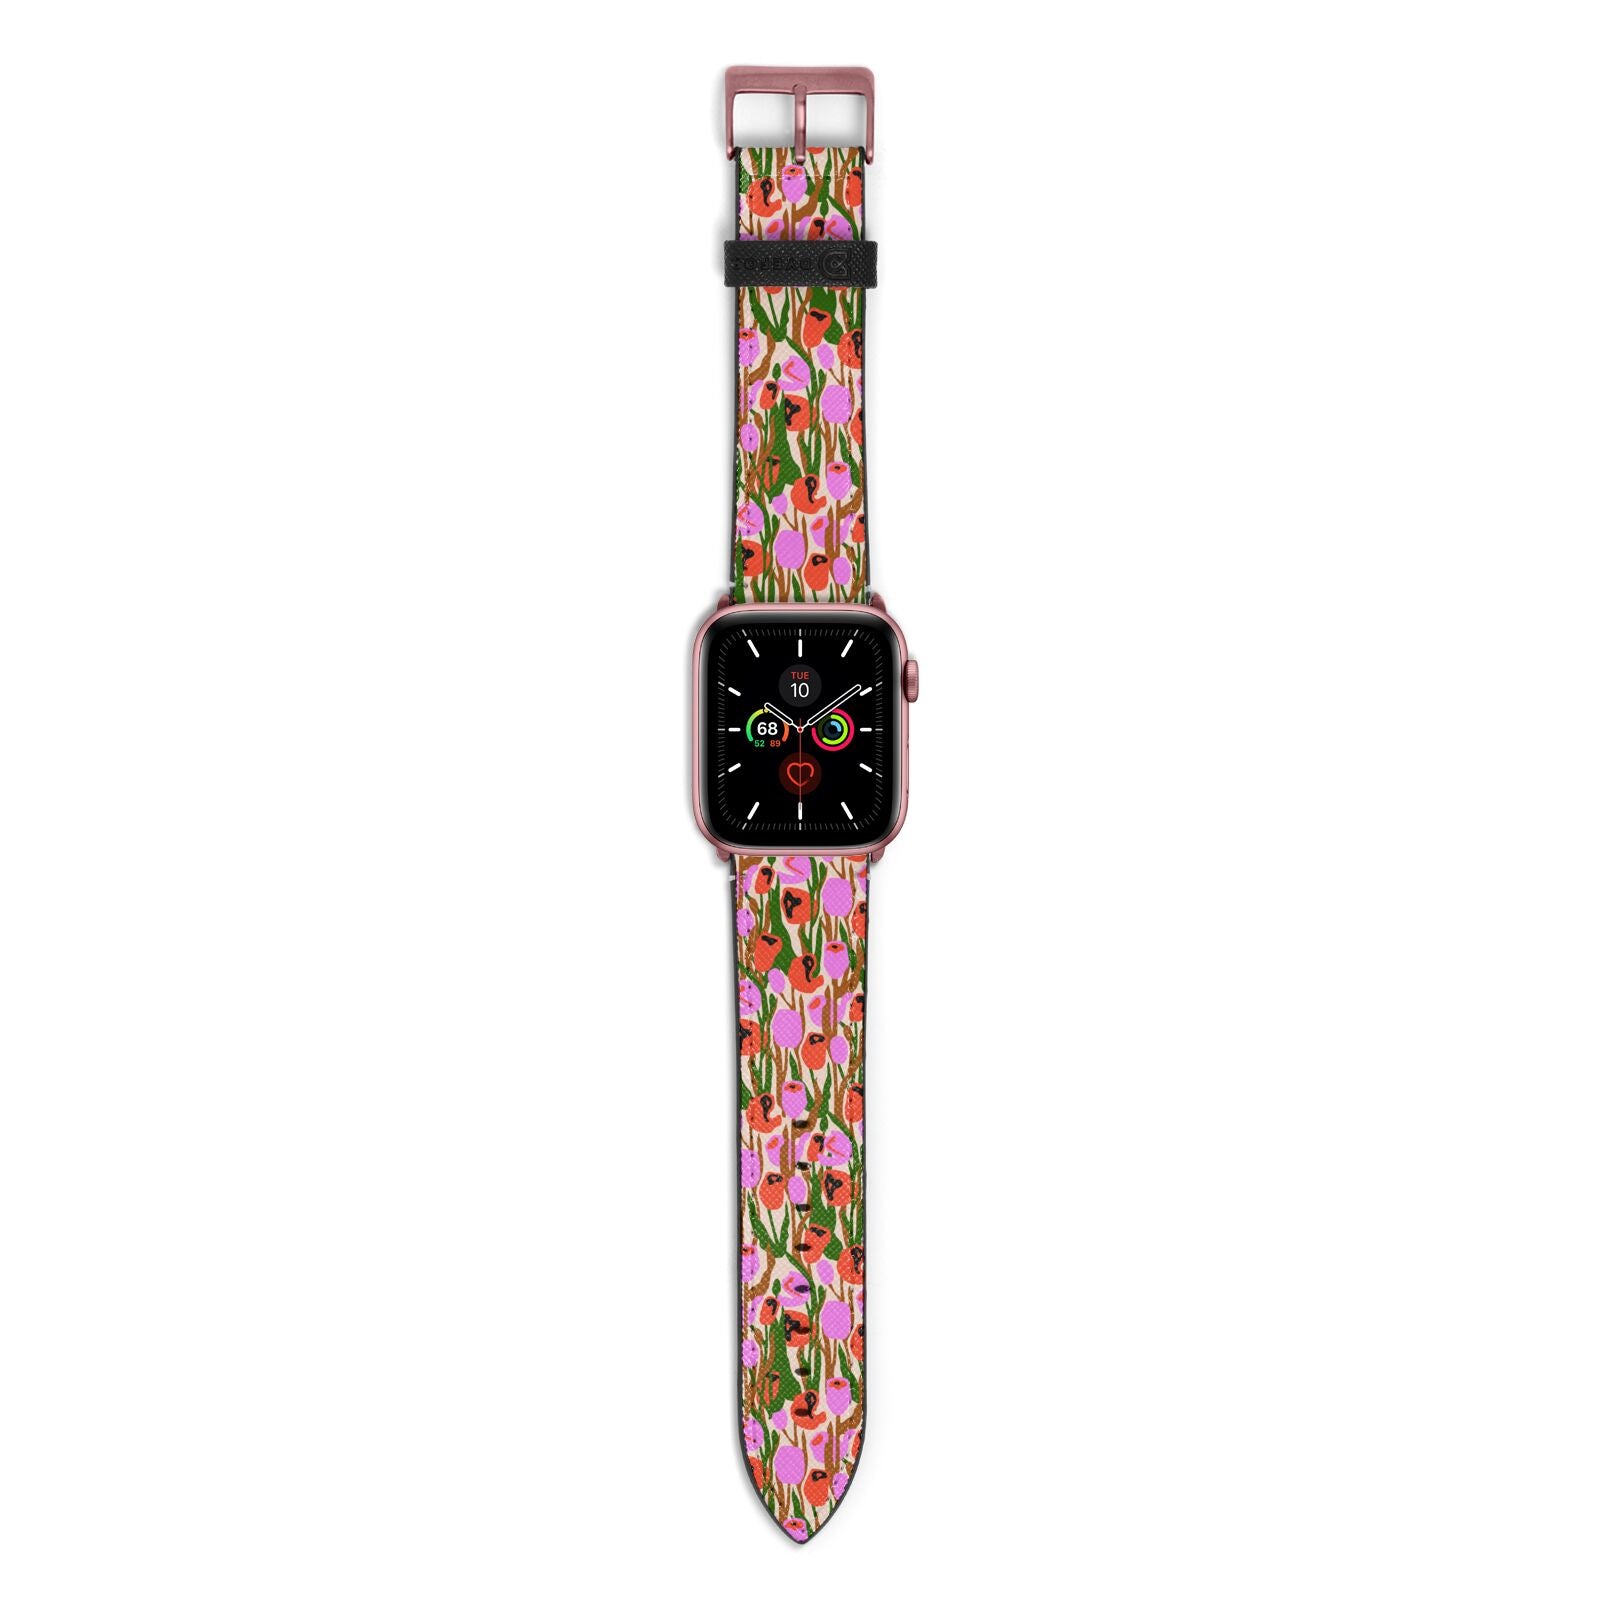 Floral Apple Watch Strap with Rose Gold Hardware